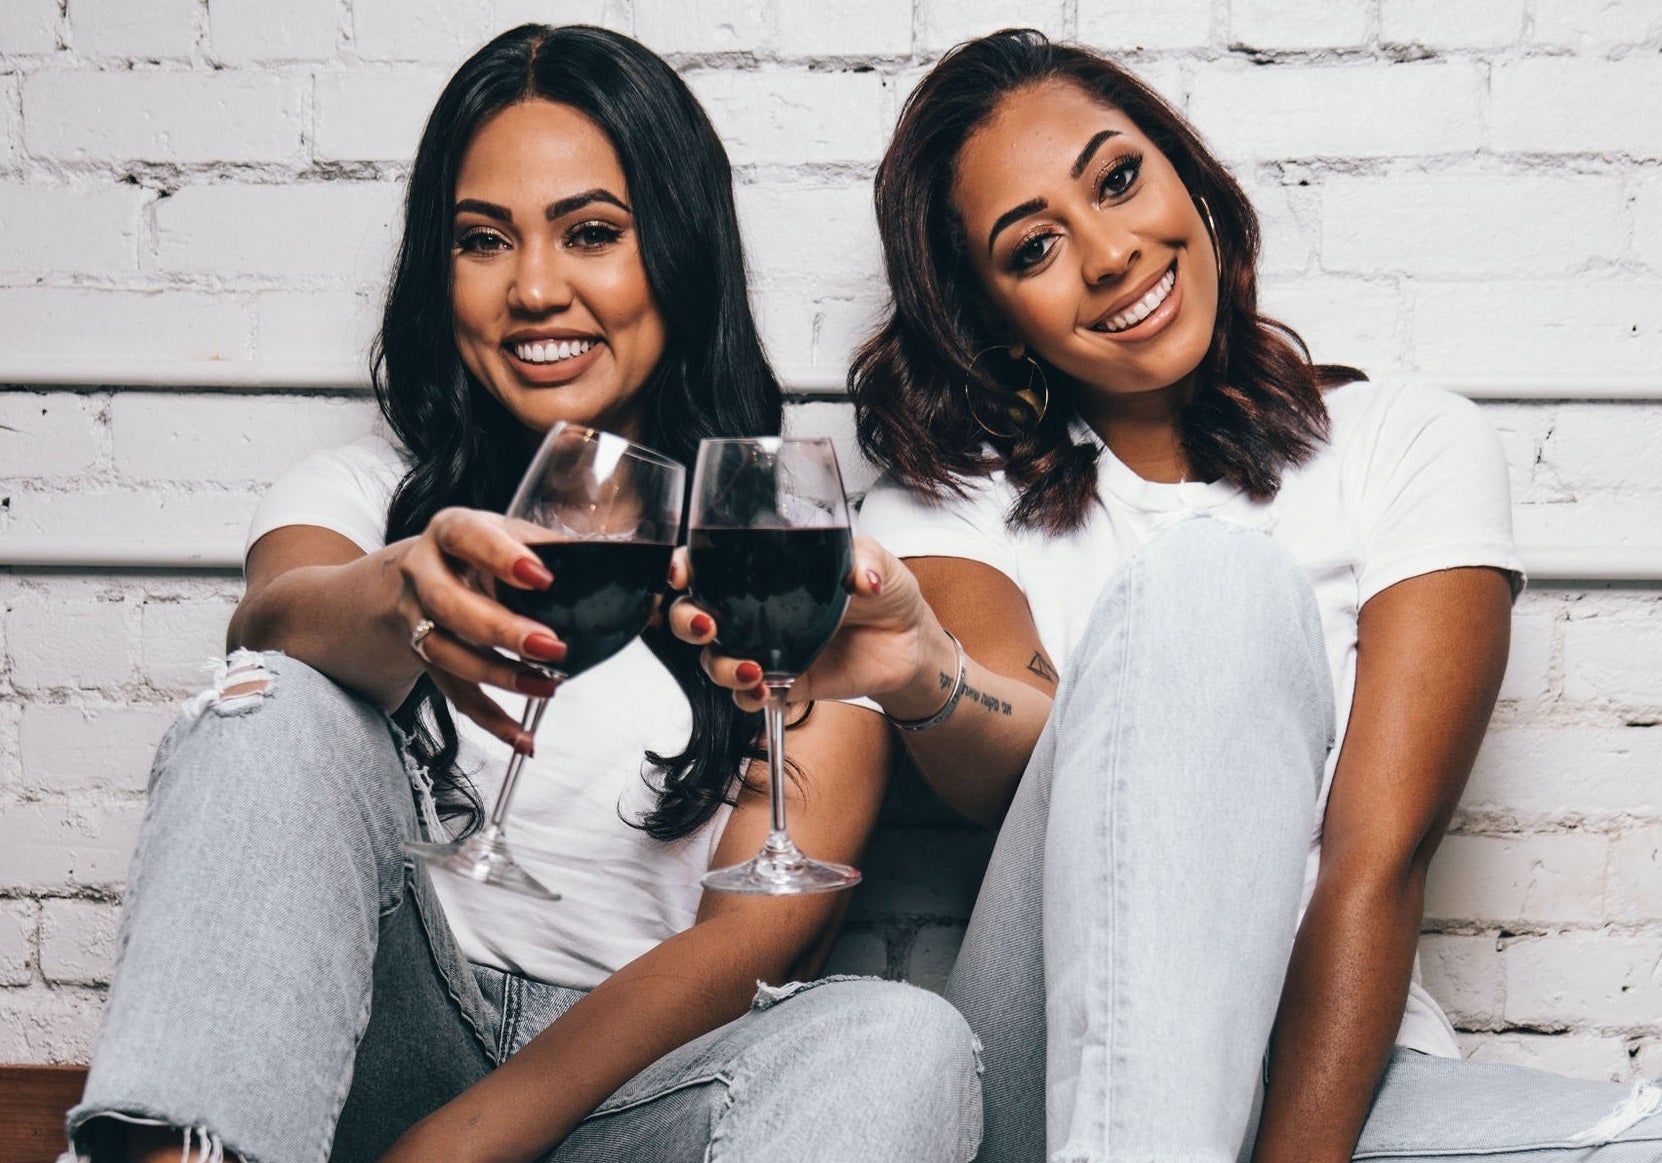 EXCLUSIVE: Ayesha Curry & Sydel Curry-Lee Talk Relaunching Their Wine Brand After Its Acquisition: “This Is A Toast To Powerful Women”